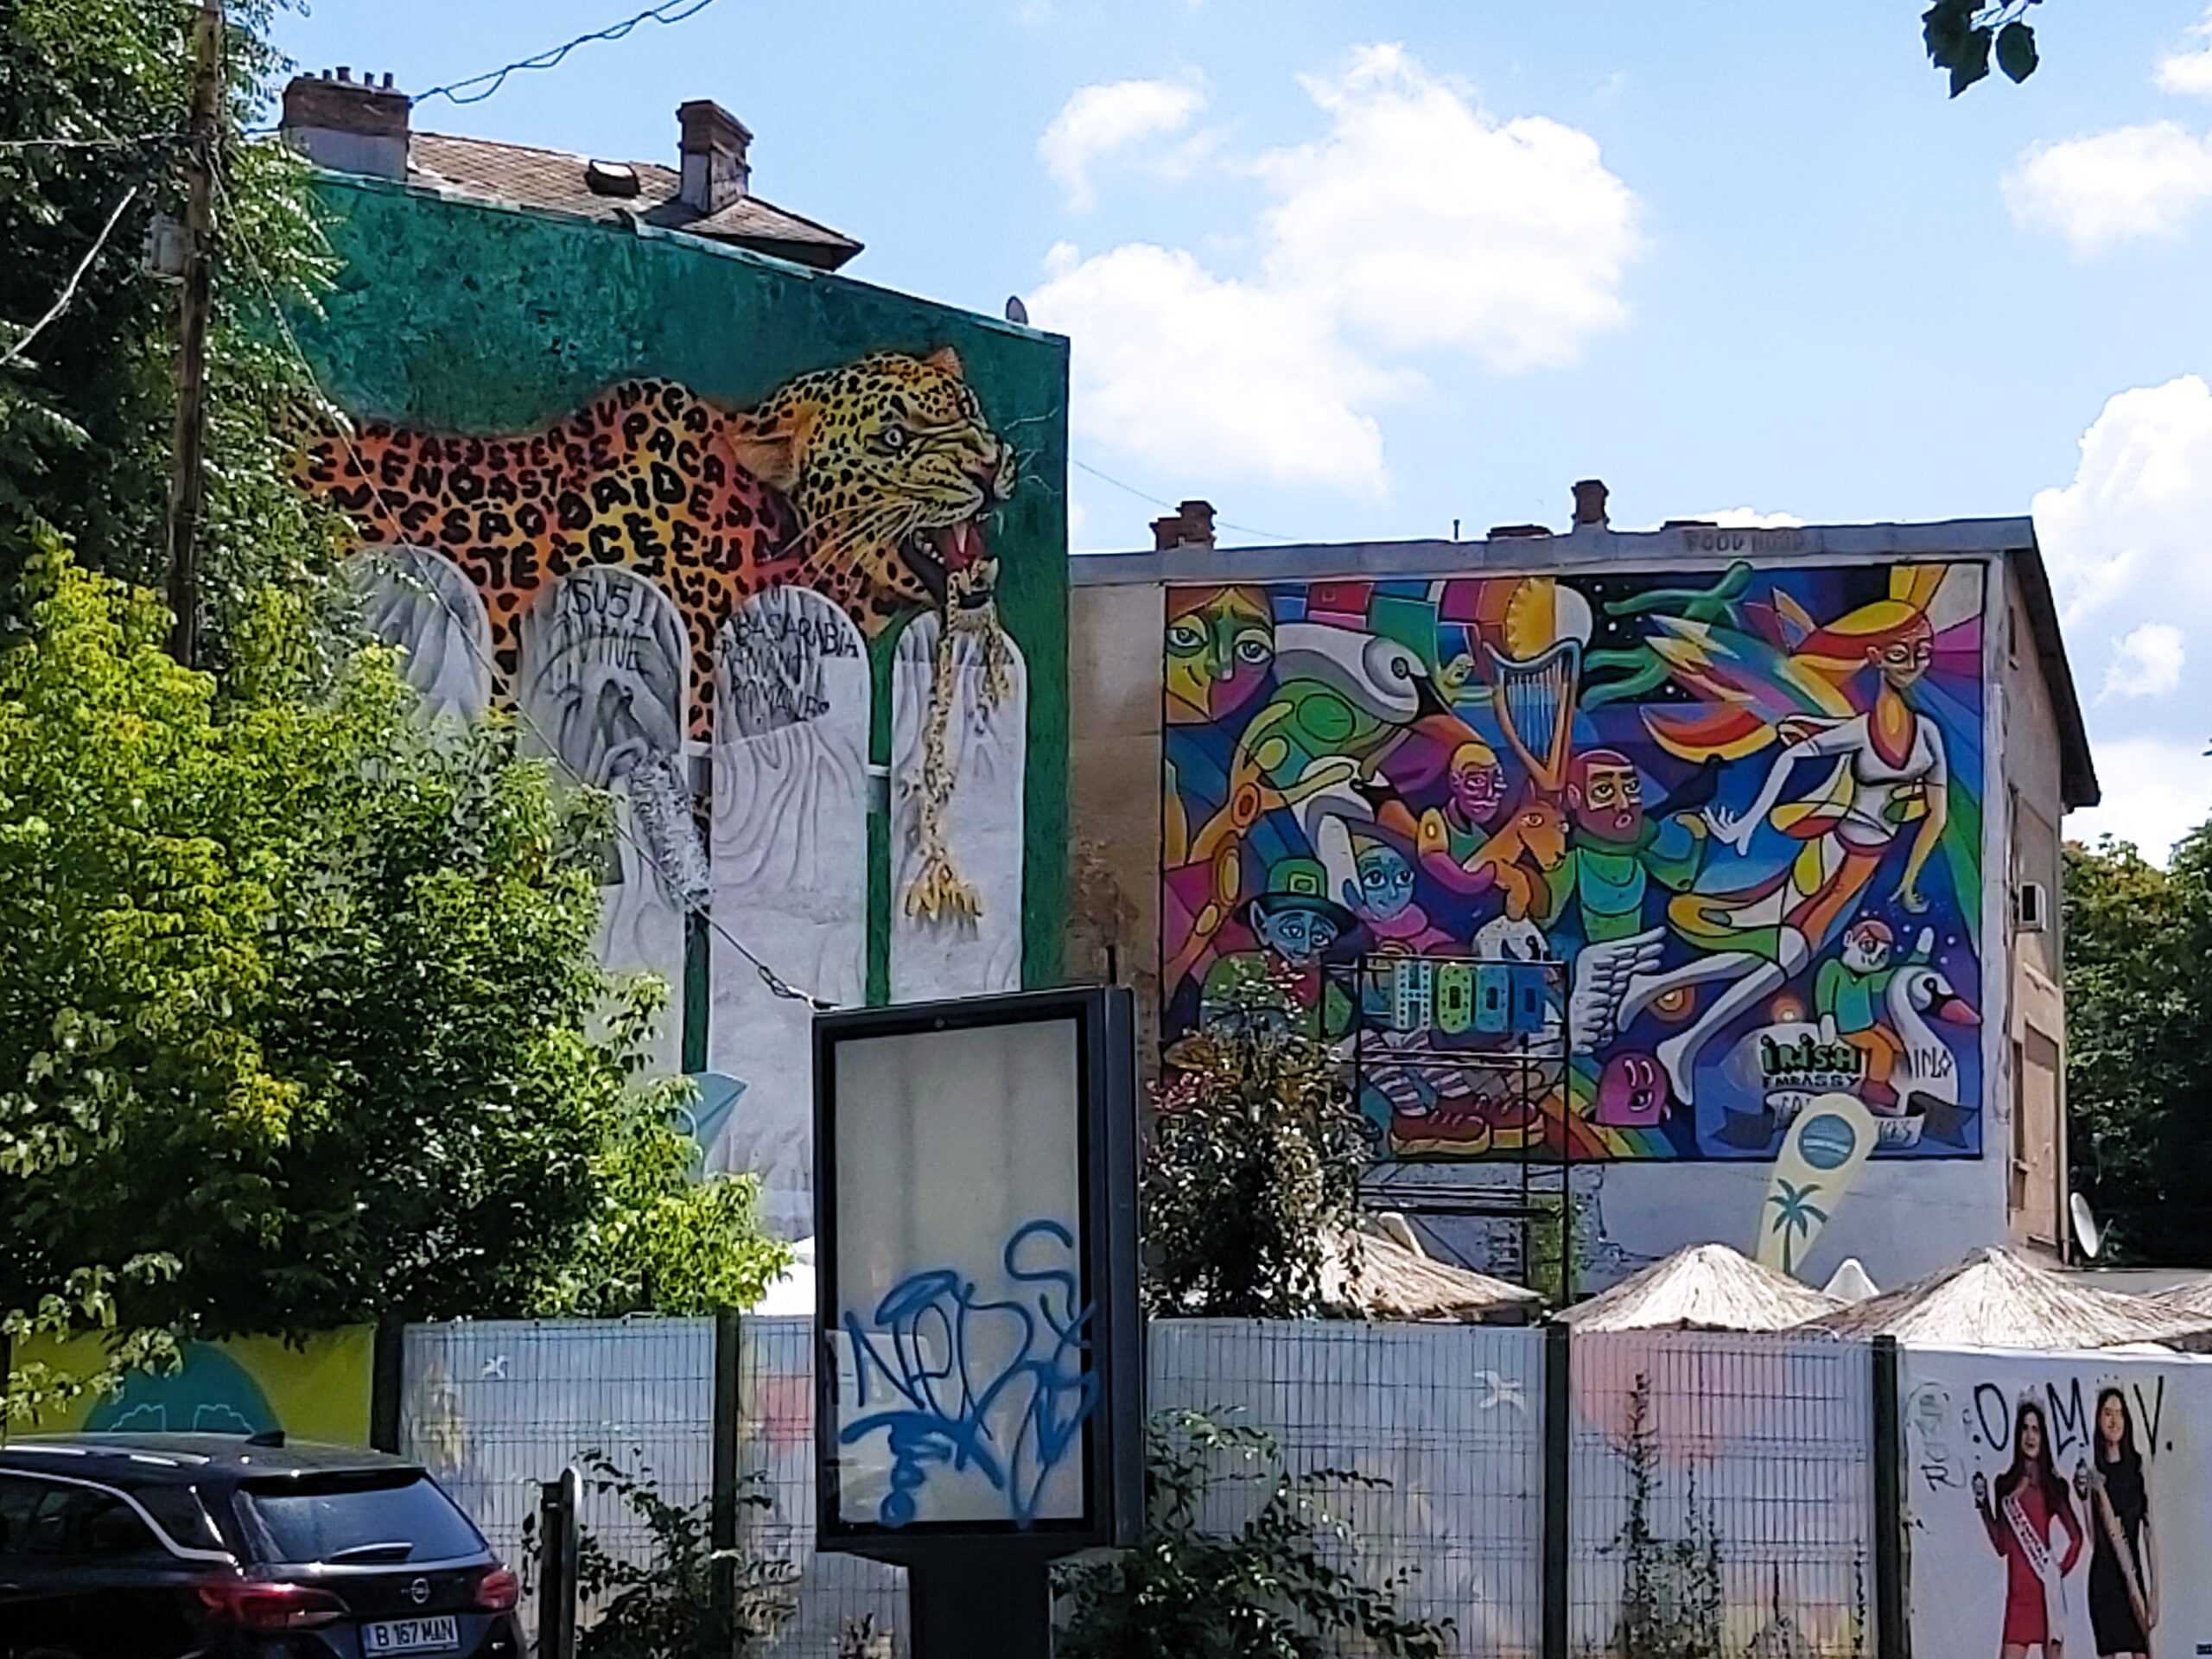 A colourful mural on two buildings consisting of people, swans and a leopard in București, Romania